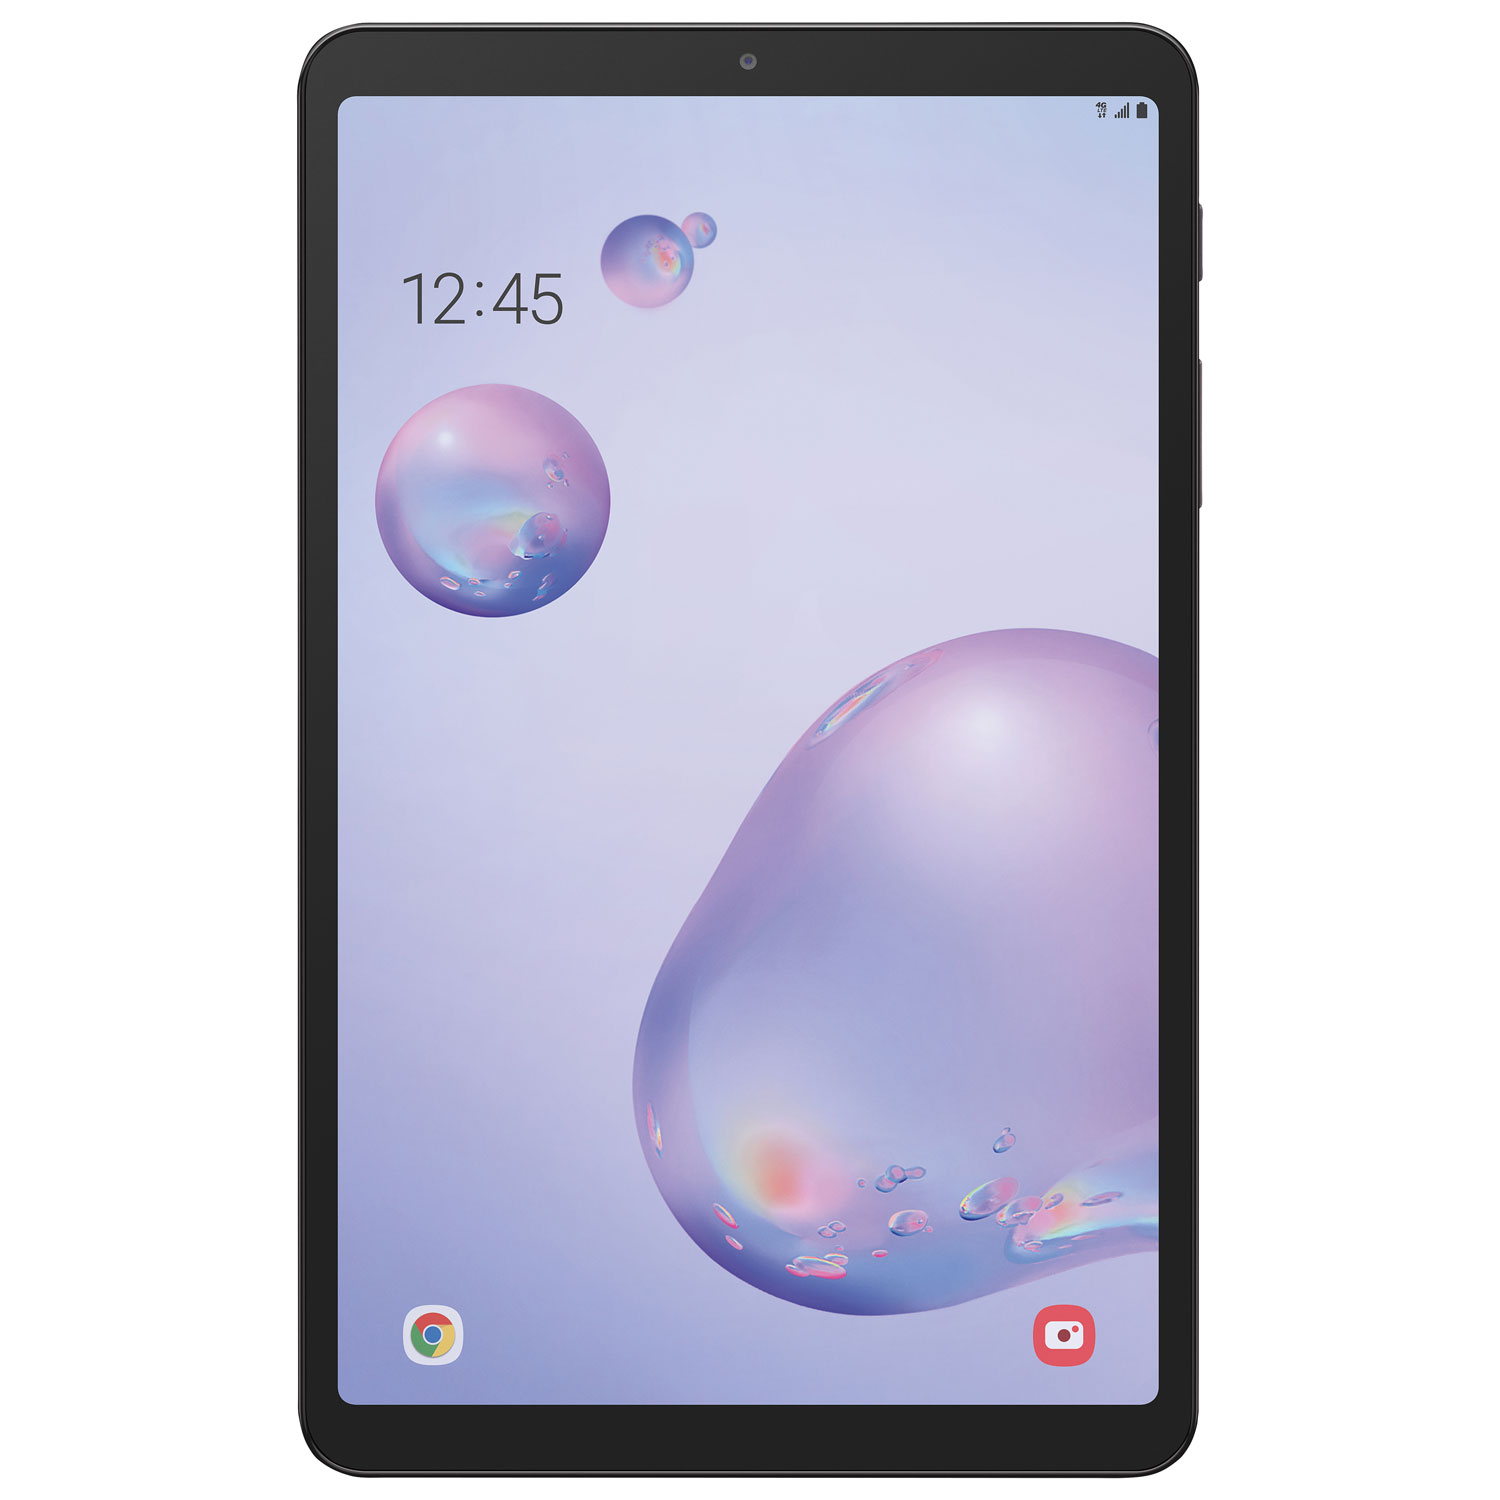 Bell Samsung Galaxy Tab A 8.4" 32GB Android 10 LTE Tablet with Exynos 7904 - Mocha - Monthly Financing